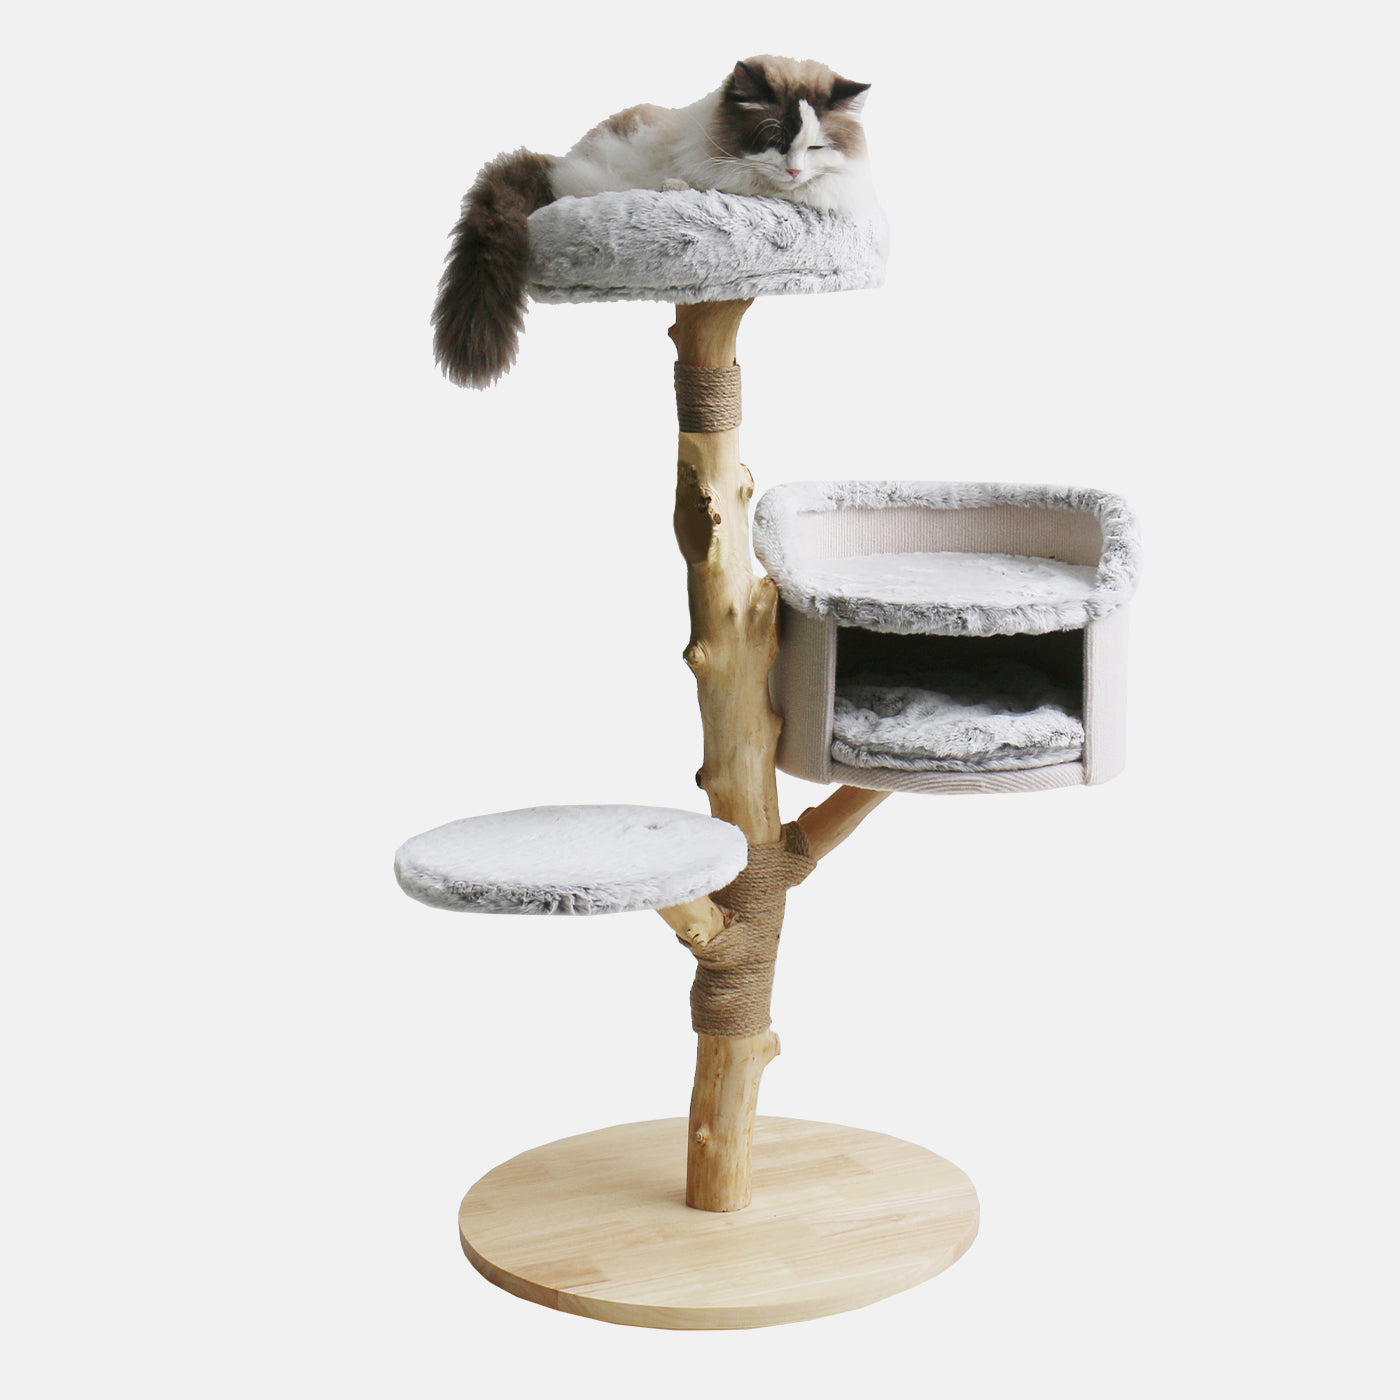 Discover our Back to Nature The Luxe Cat Scratch Post. Features Three Open Perches For Kittens To Rest on, Made With Super Soft Plush Fabric! Available Now at Lords & Labradors